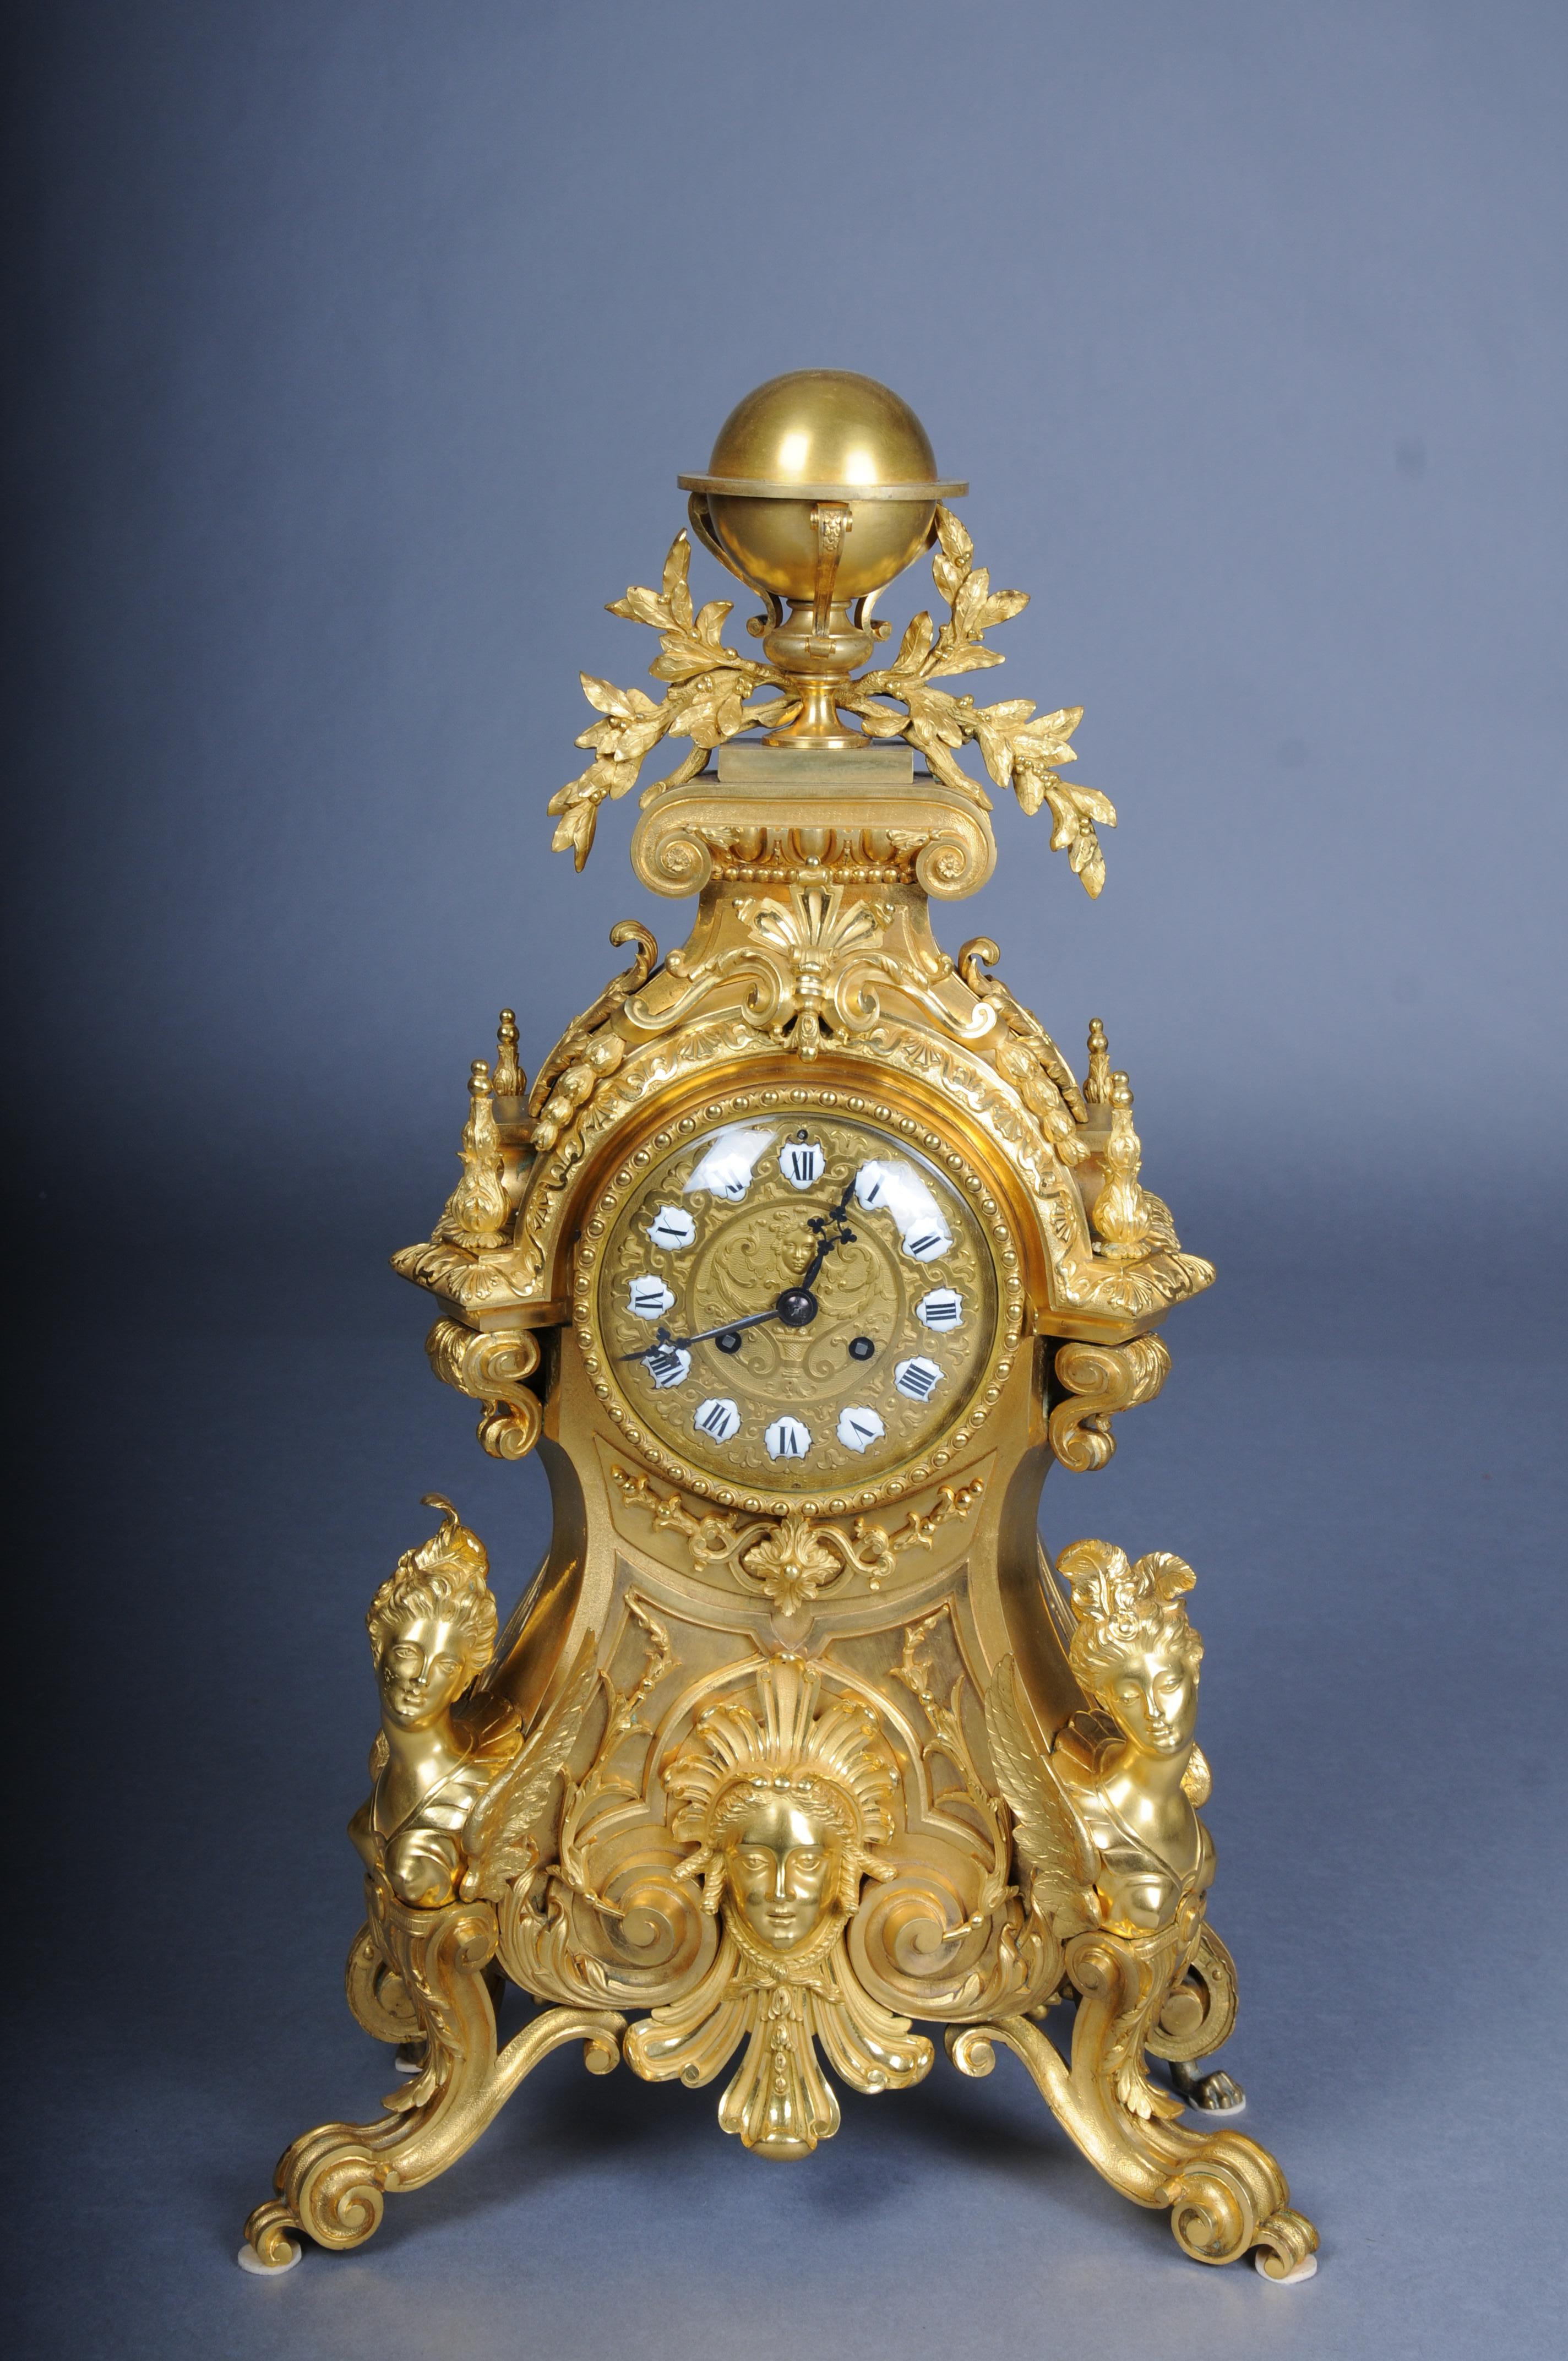 Royal fire-gilded mantel clock/Pendule Napoleon III, 1870, Paris, signed Lantier

A fantastic masterwork of perfection with beautiful fire-gilded bronze.

Bronze, gold plated. On volute and paw feet a curved case with a woman's mask, winged female